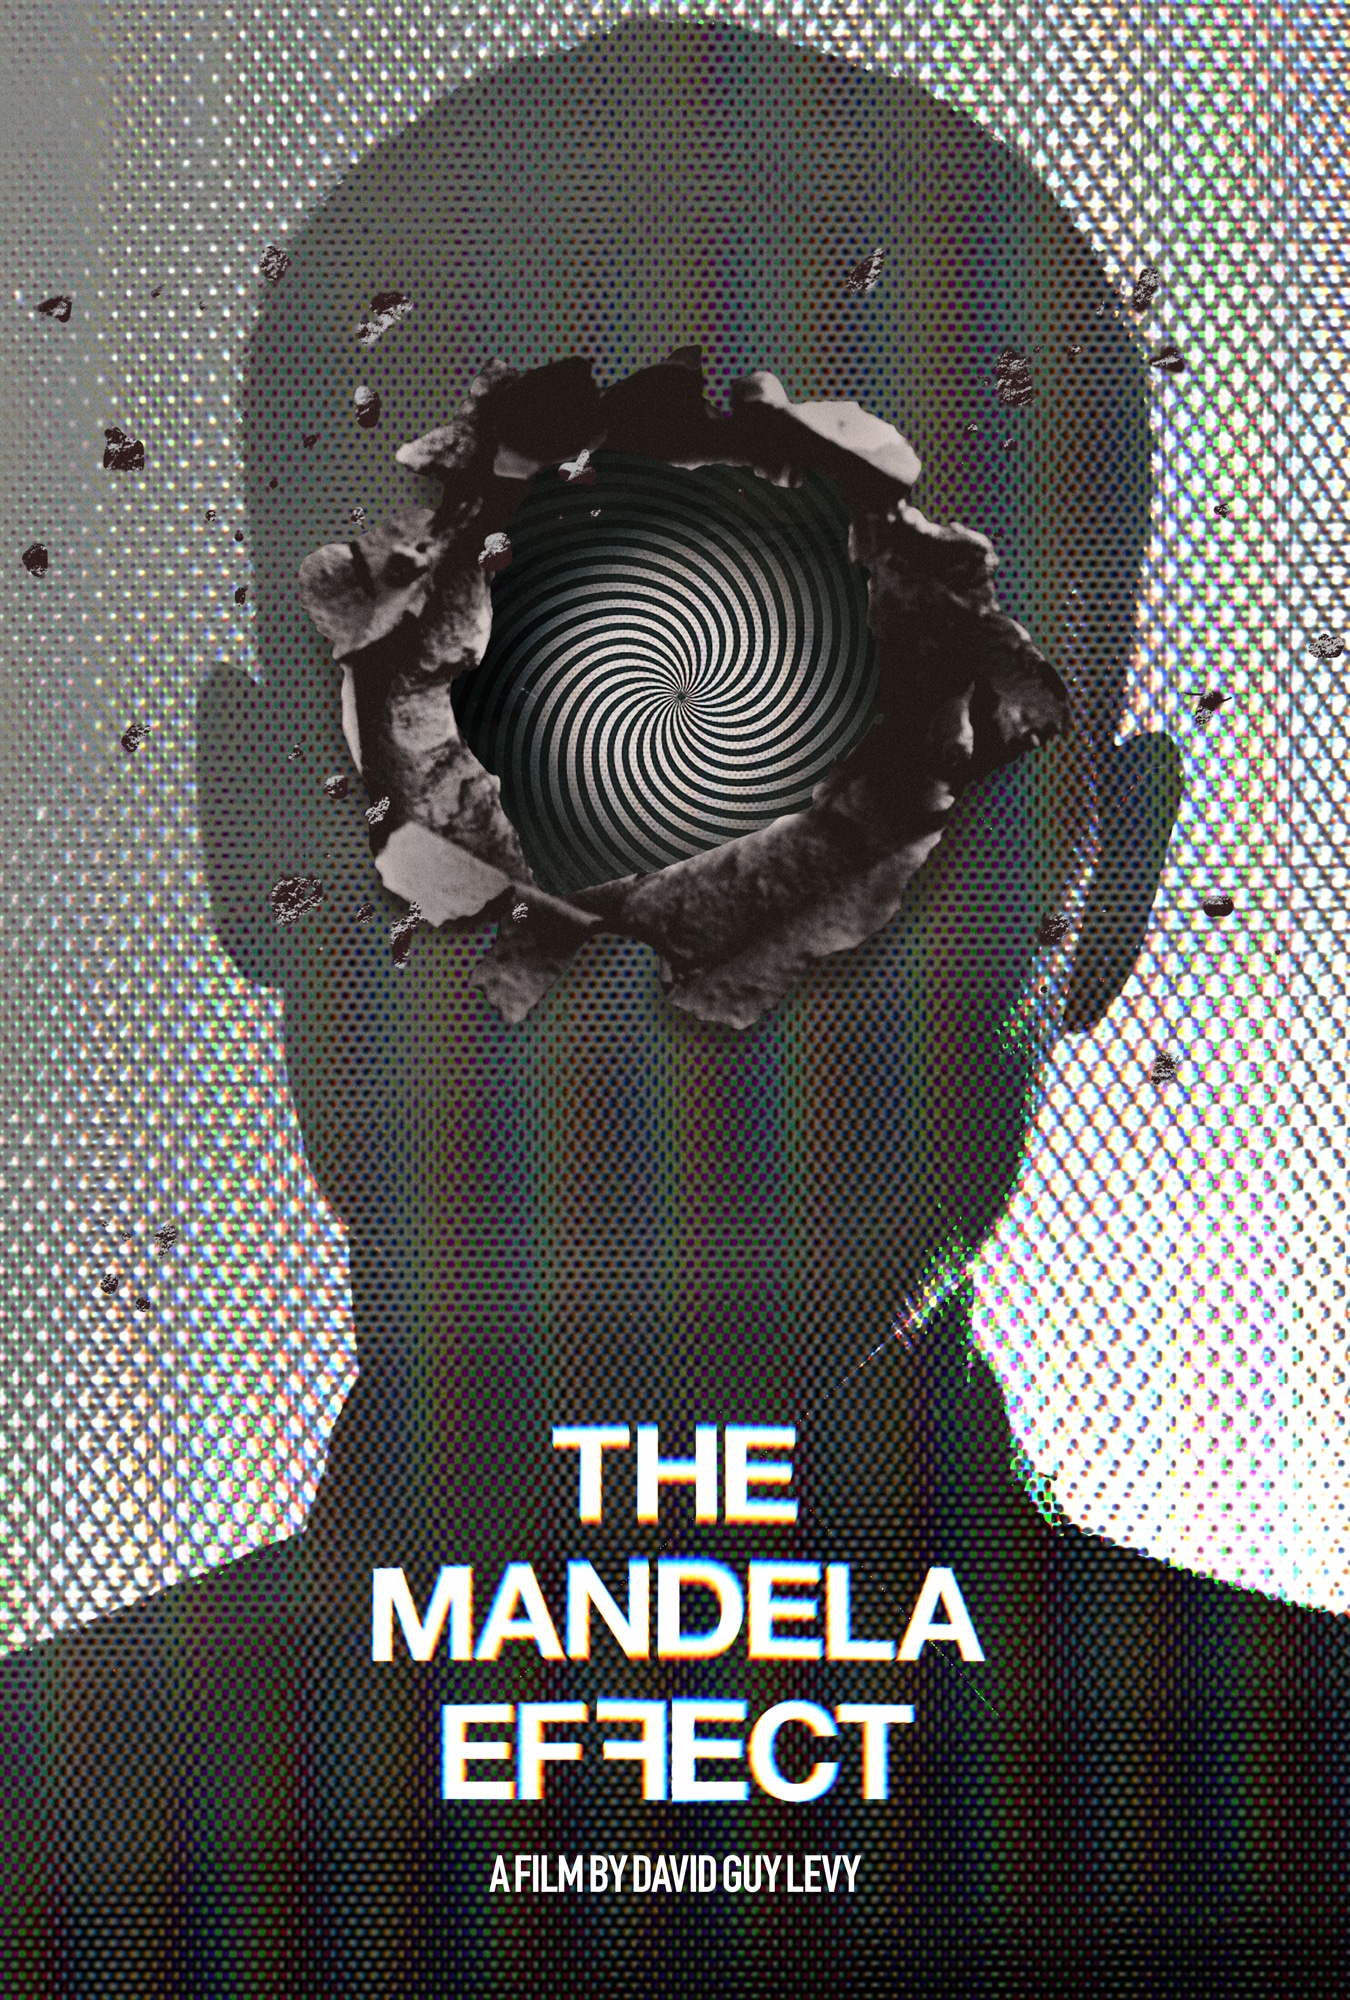 Exclusive interview with the cast of ‘the mandela effect’